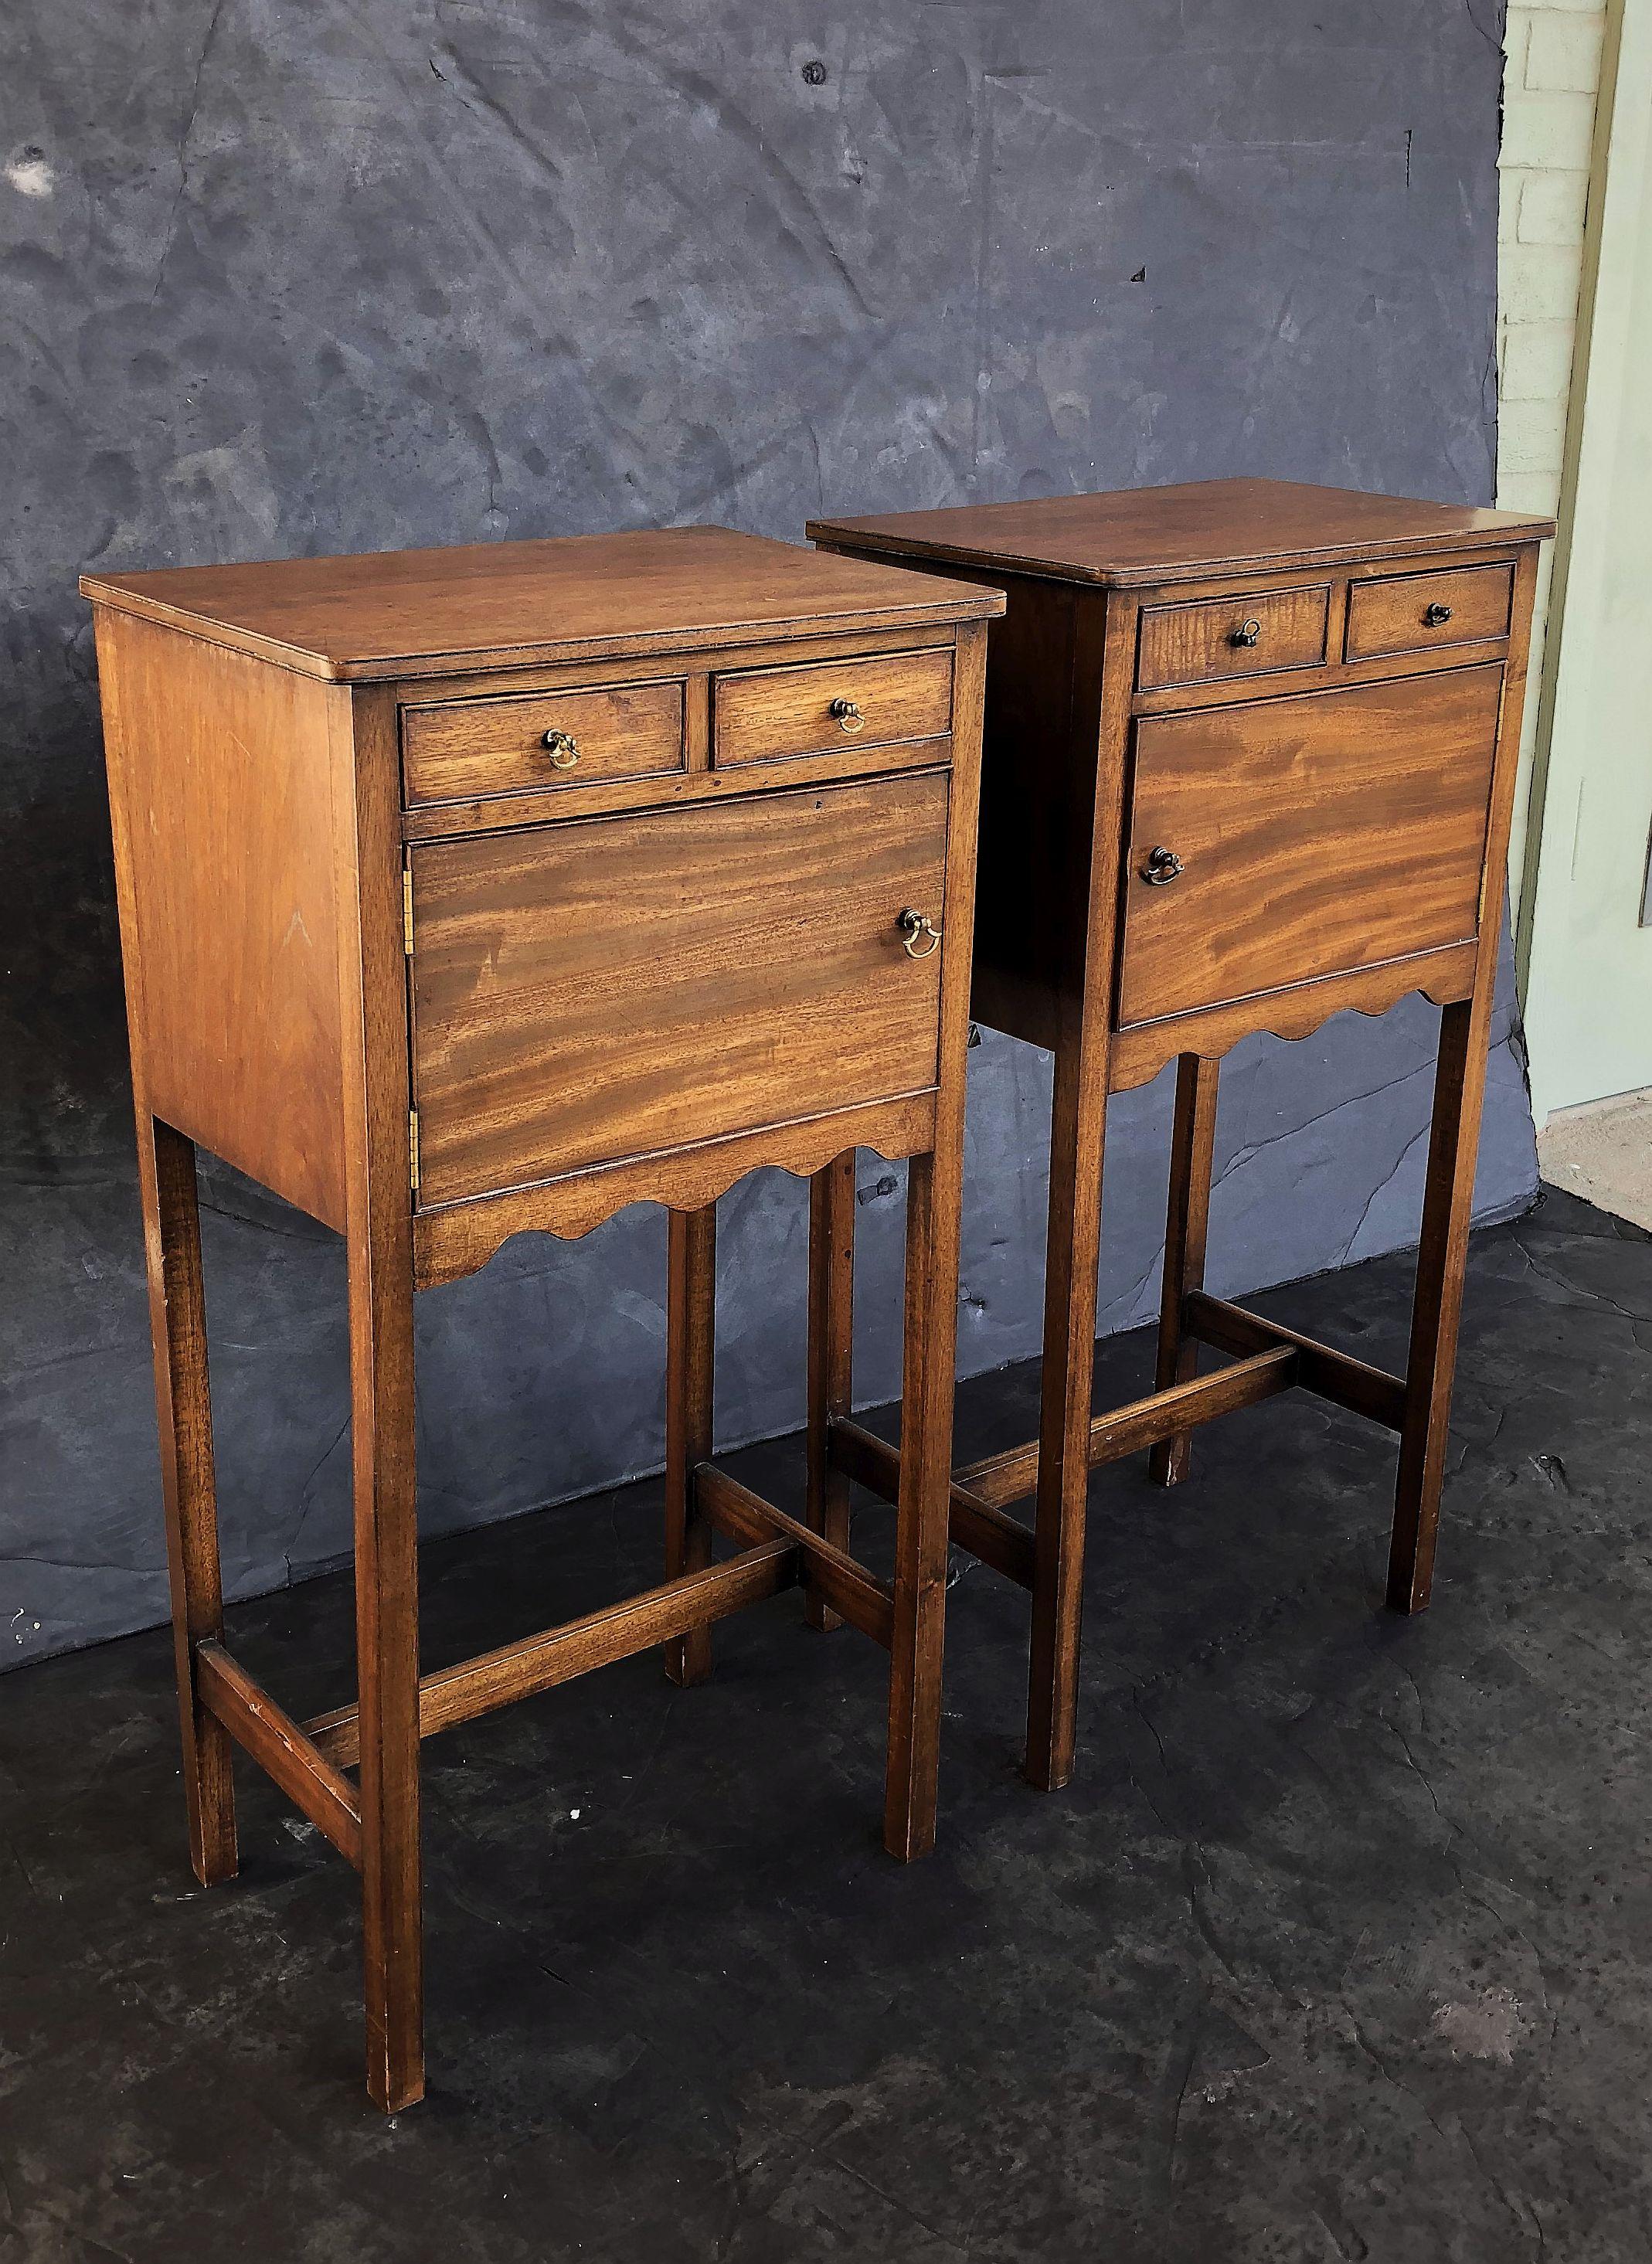 A pair of fine English nightstands or bedside end tables, in the Georgian style, each featuring a moulded top over a frieze with two small beaded drawers over a beaded cupboard door, with a scalloped edge detail, and set upon a four leg support with